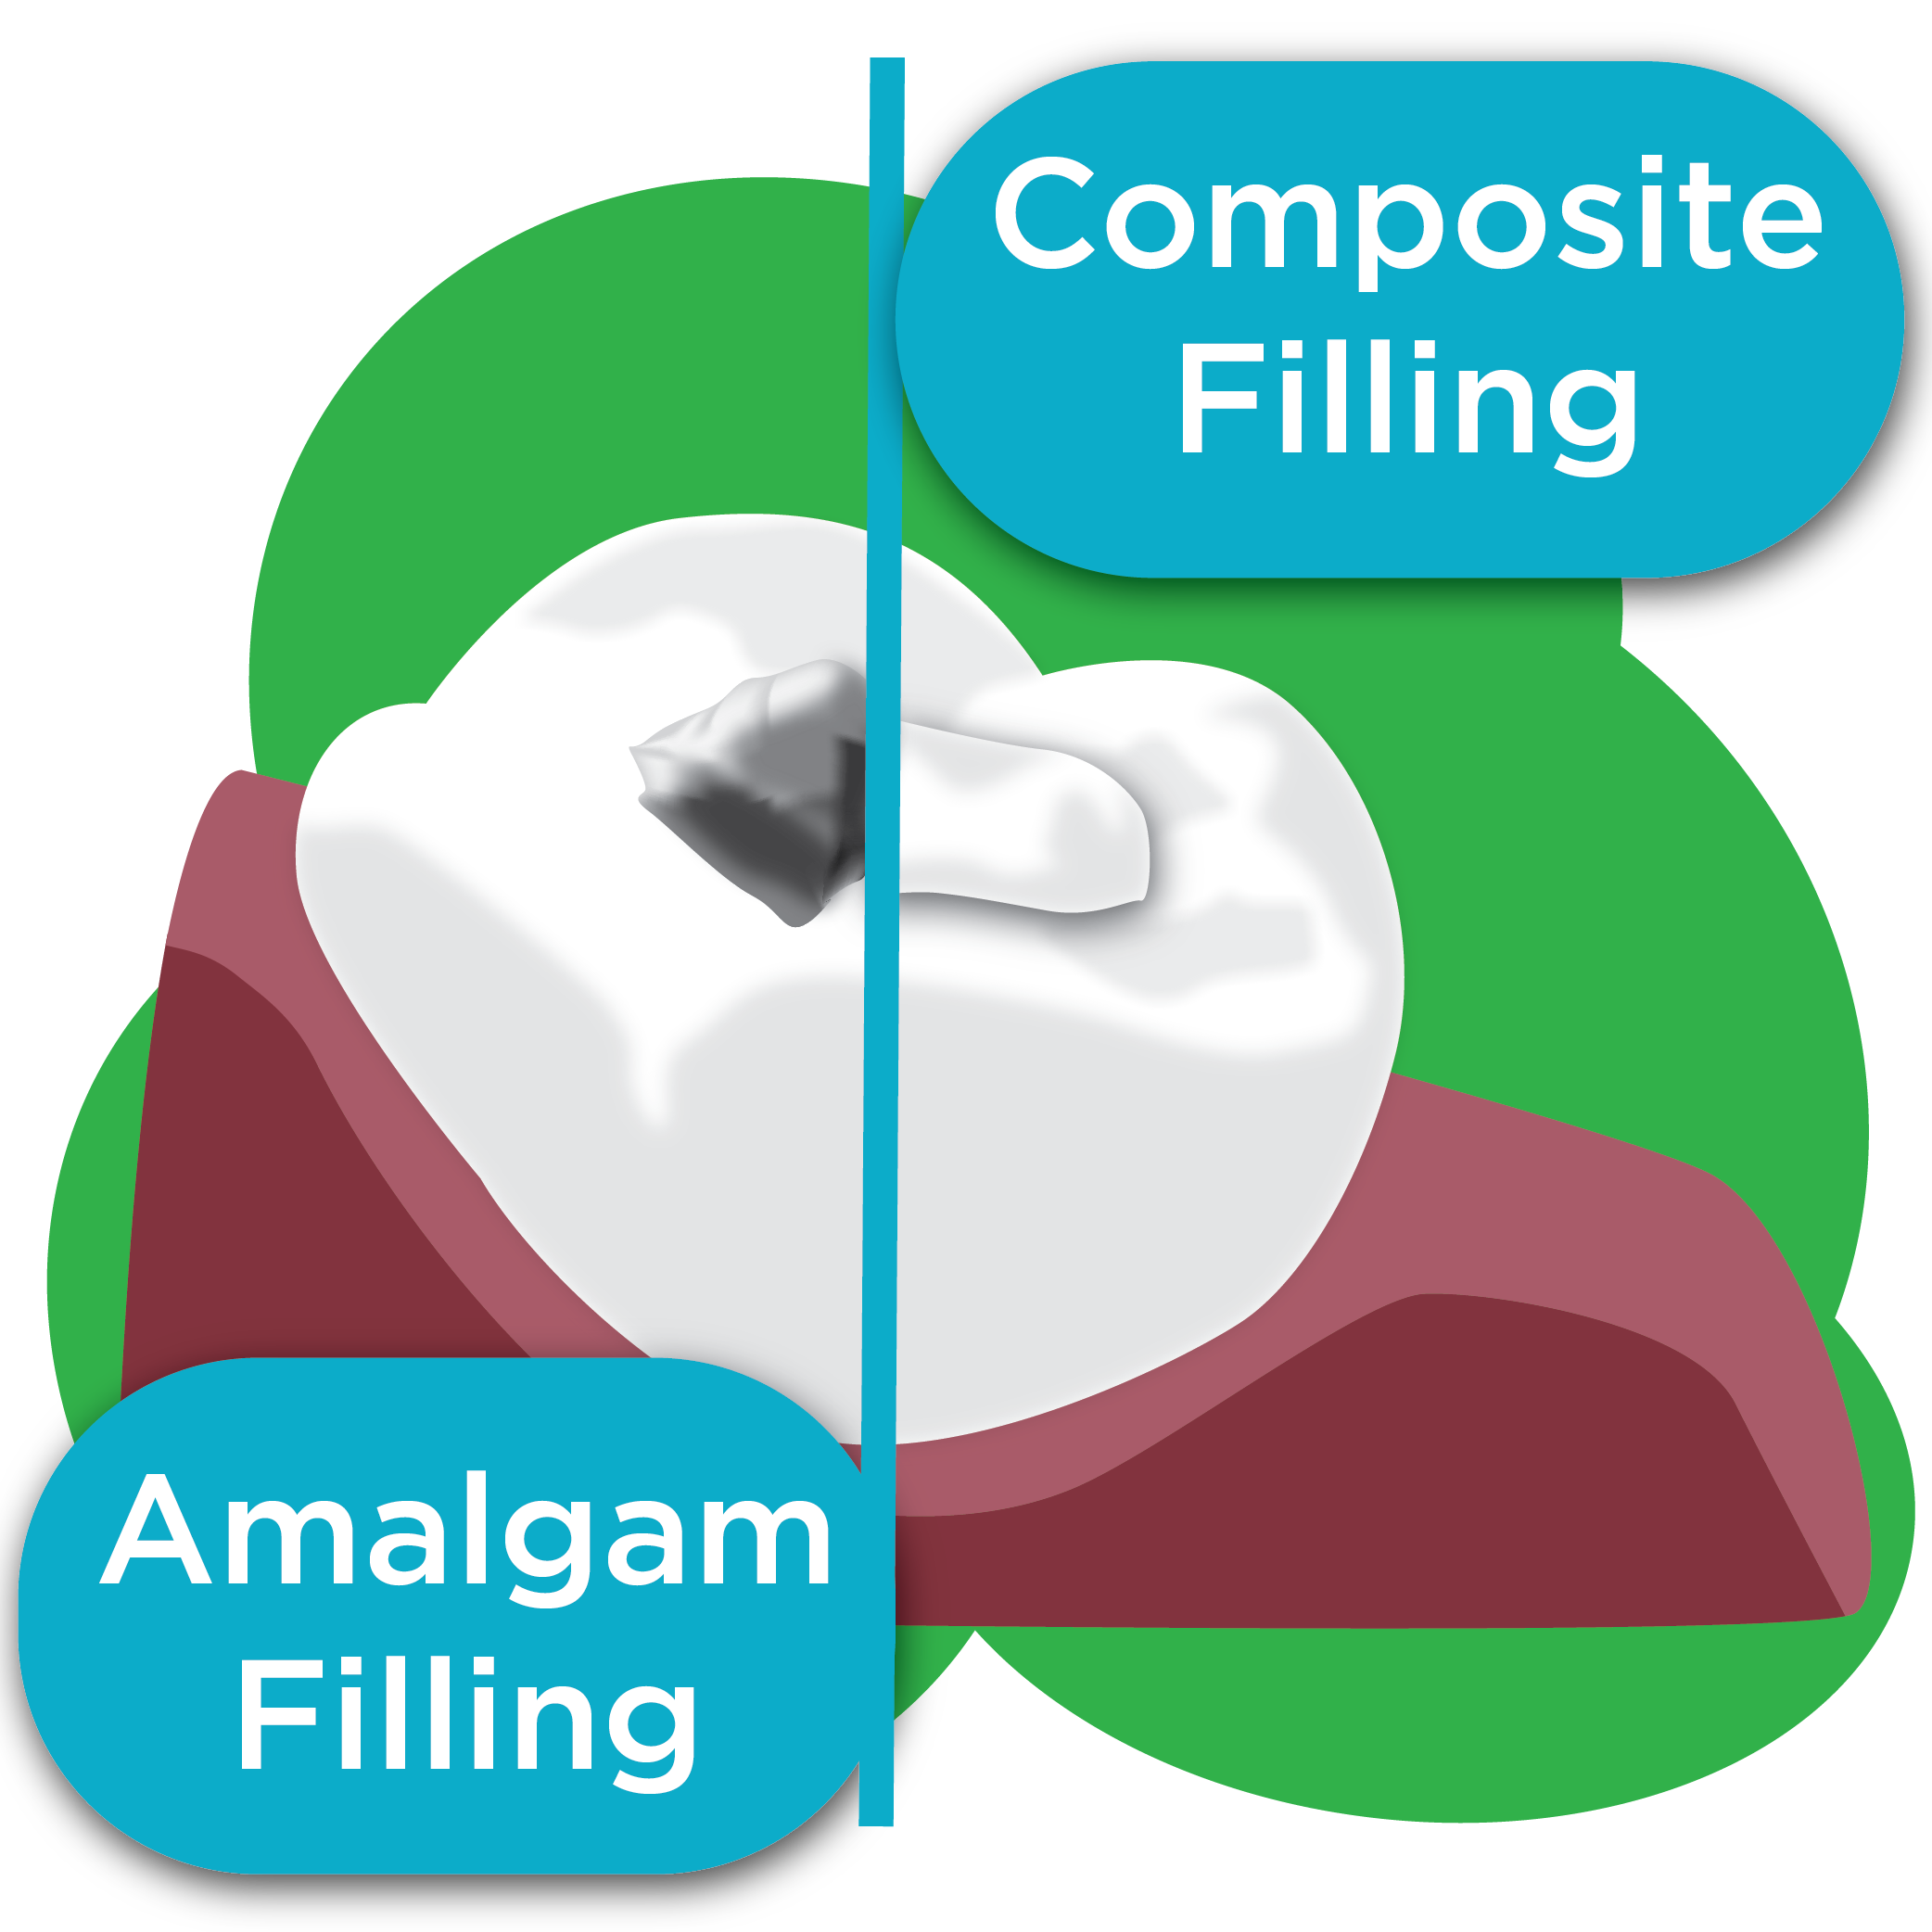 An illustration with a tooth divided by a line. One half of the tooth has an amalgam (silver) filling and the other side as composite resin (tooth colored) filling